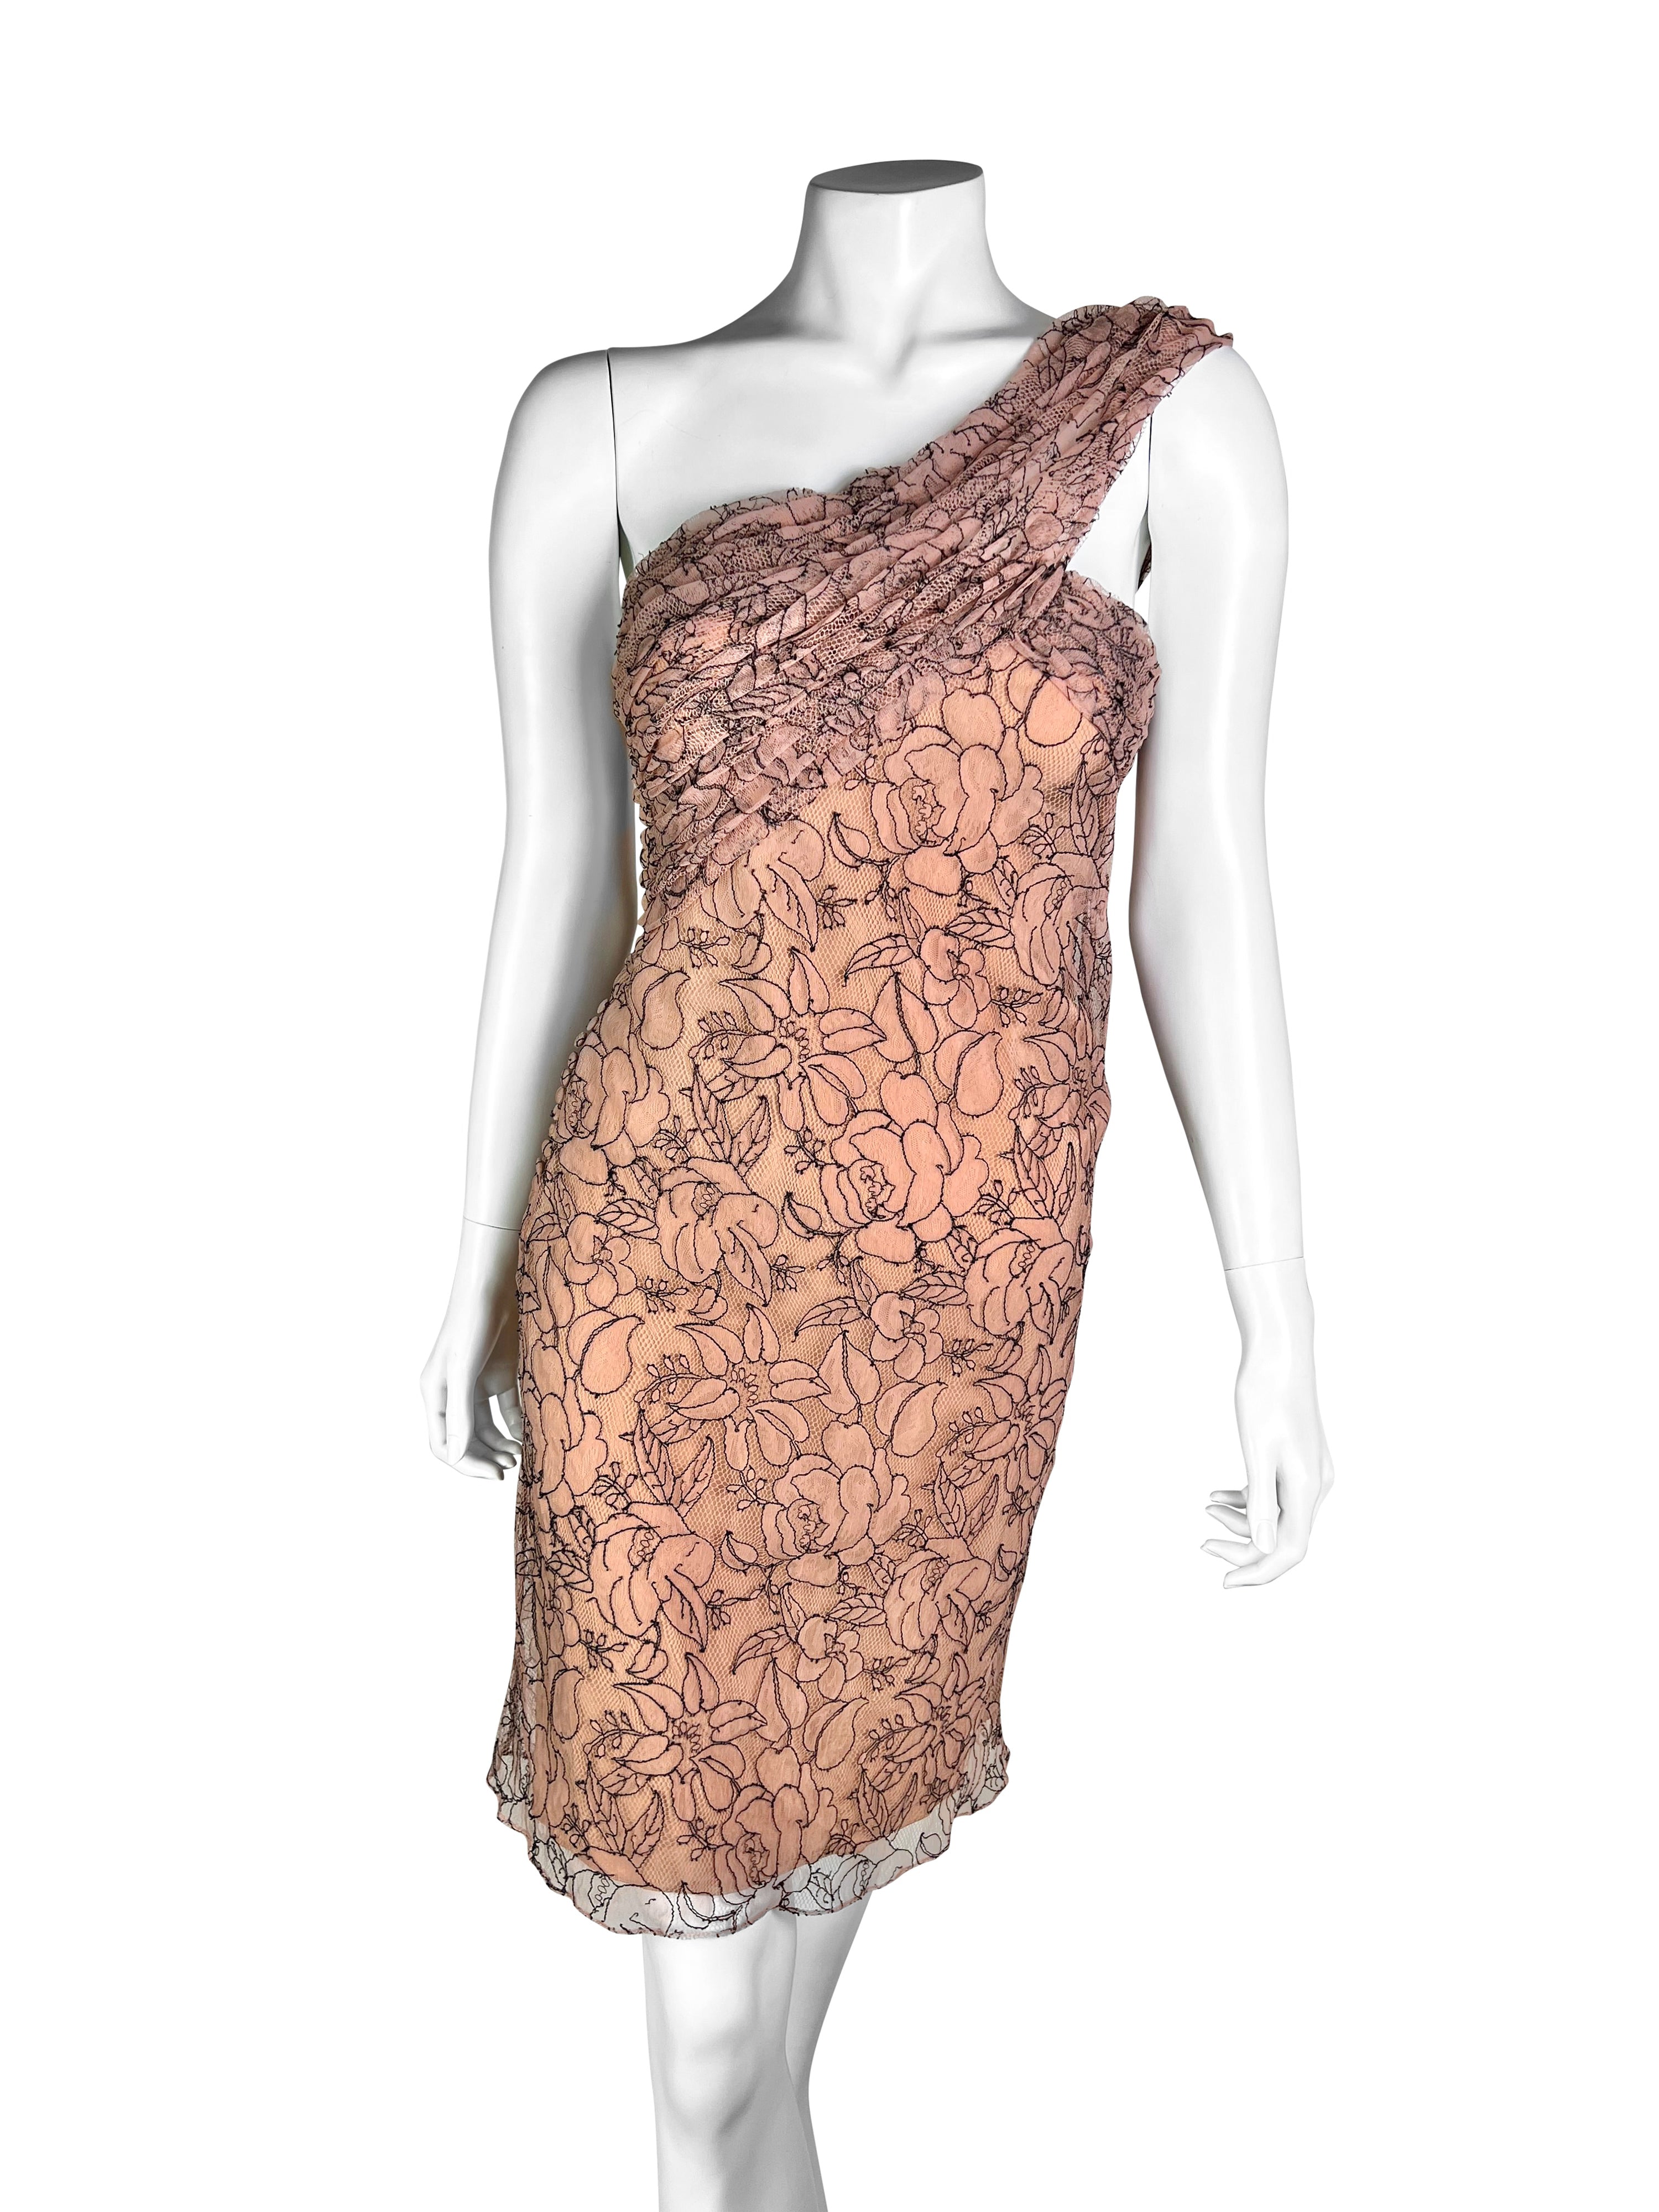 Dior Spring 2006 Lace Dress